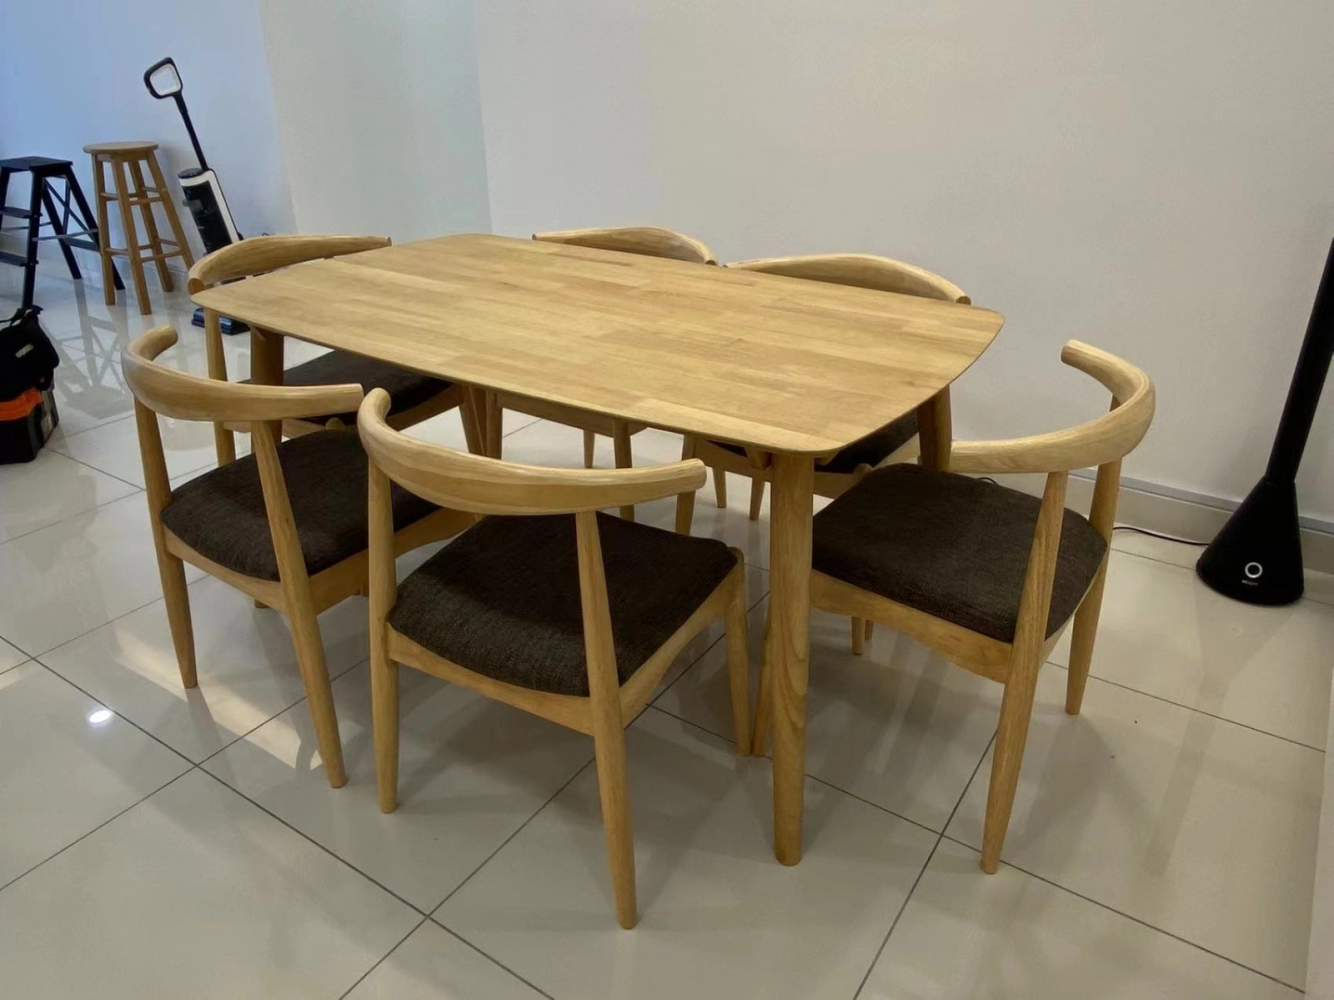 Miami (1+6) Solid Wood Dining Set